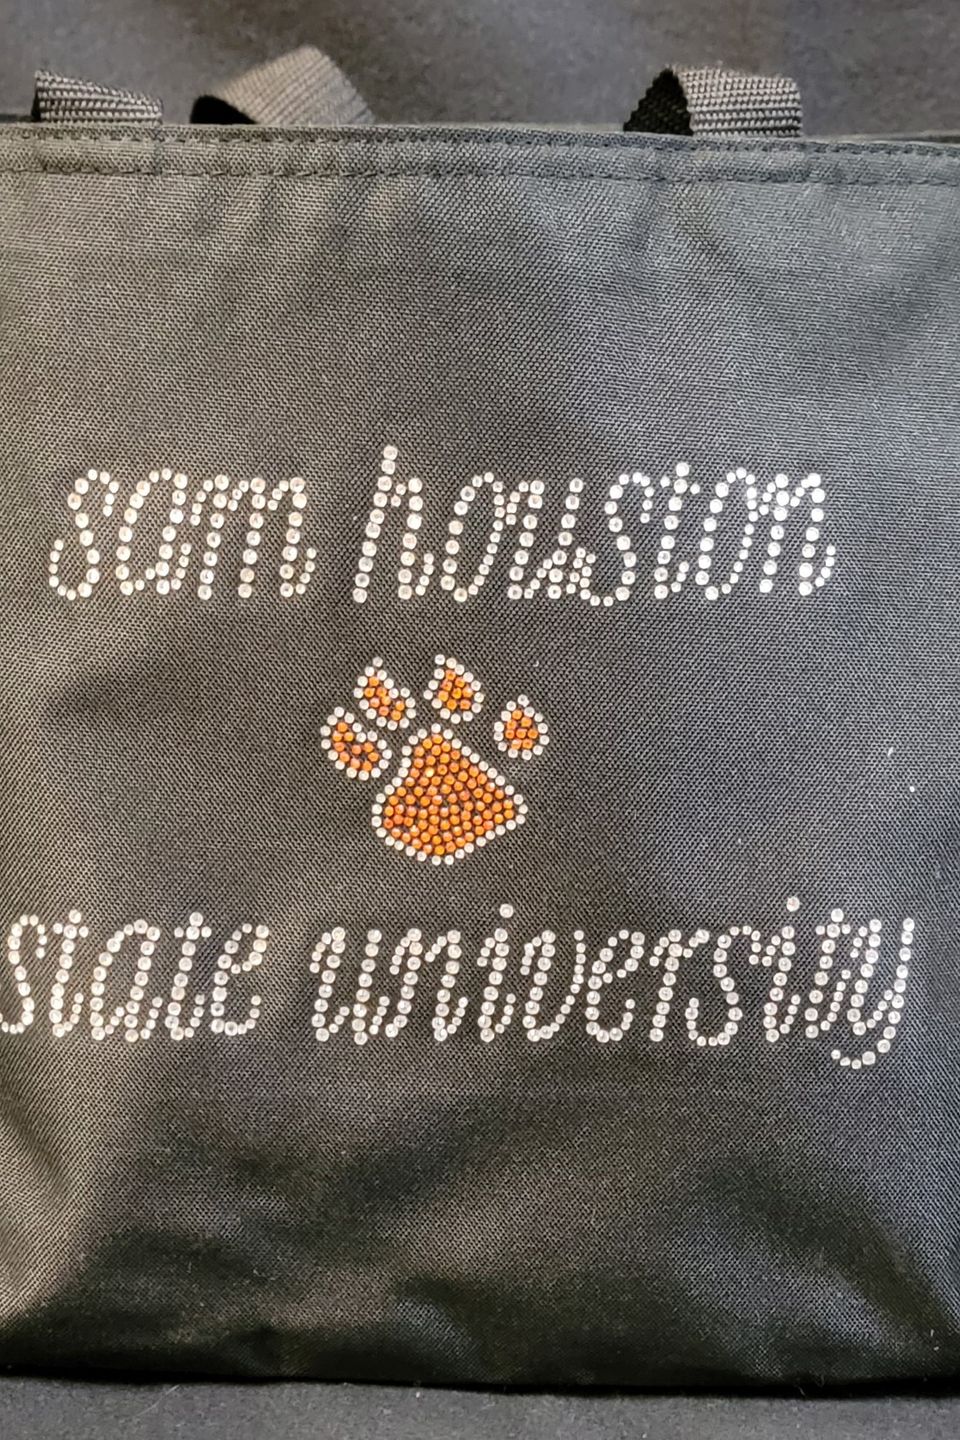 Rhinestone Bling tote bag example with rhinestones used in paw print design with wording Sam Houston State University 